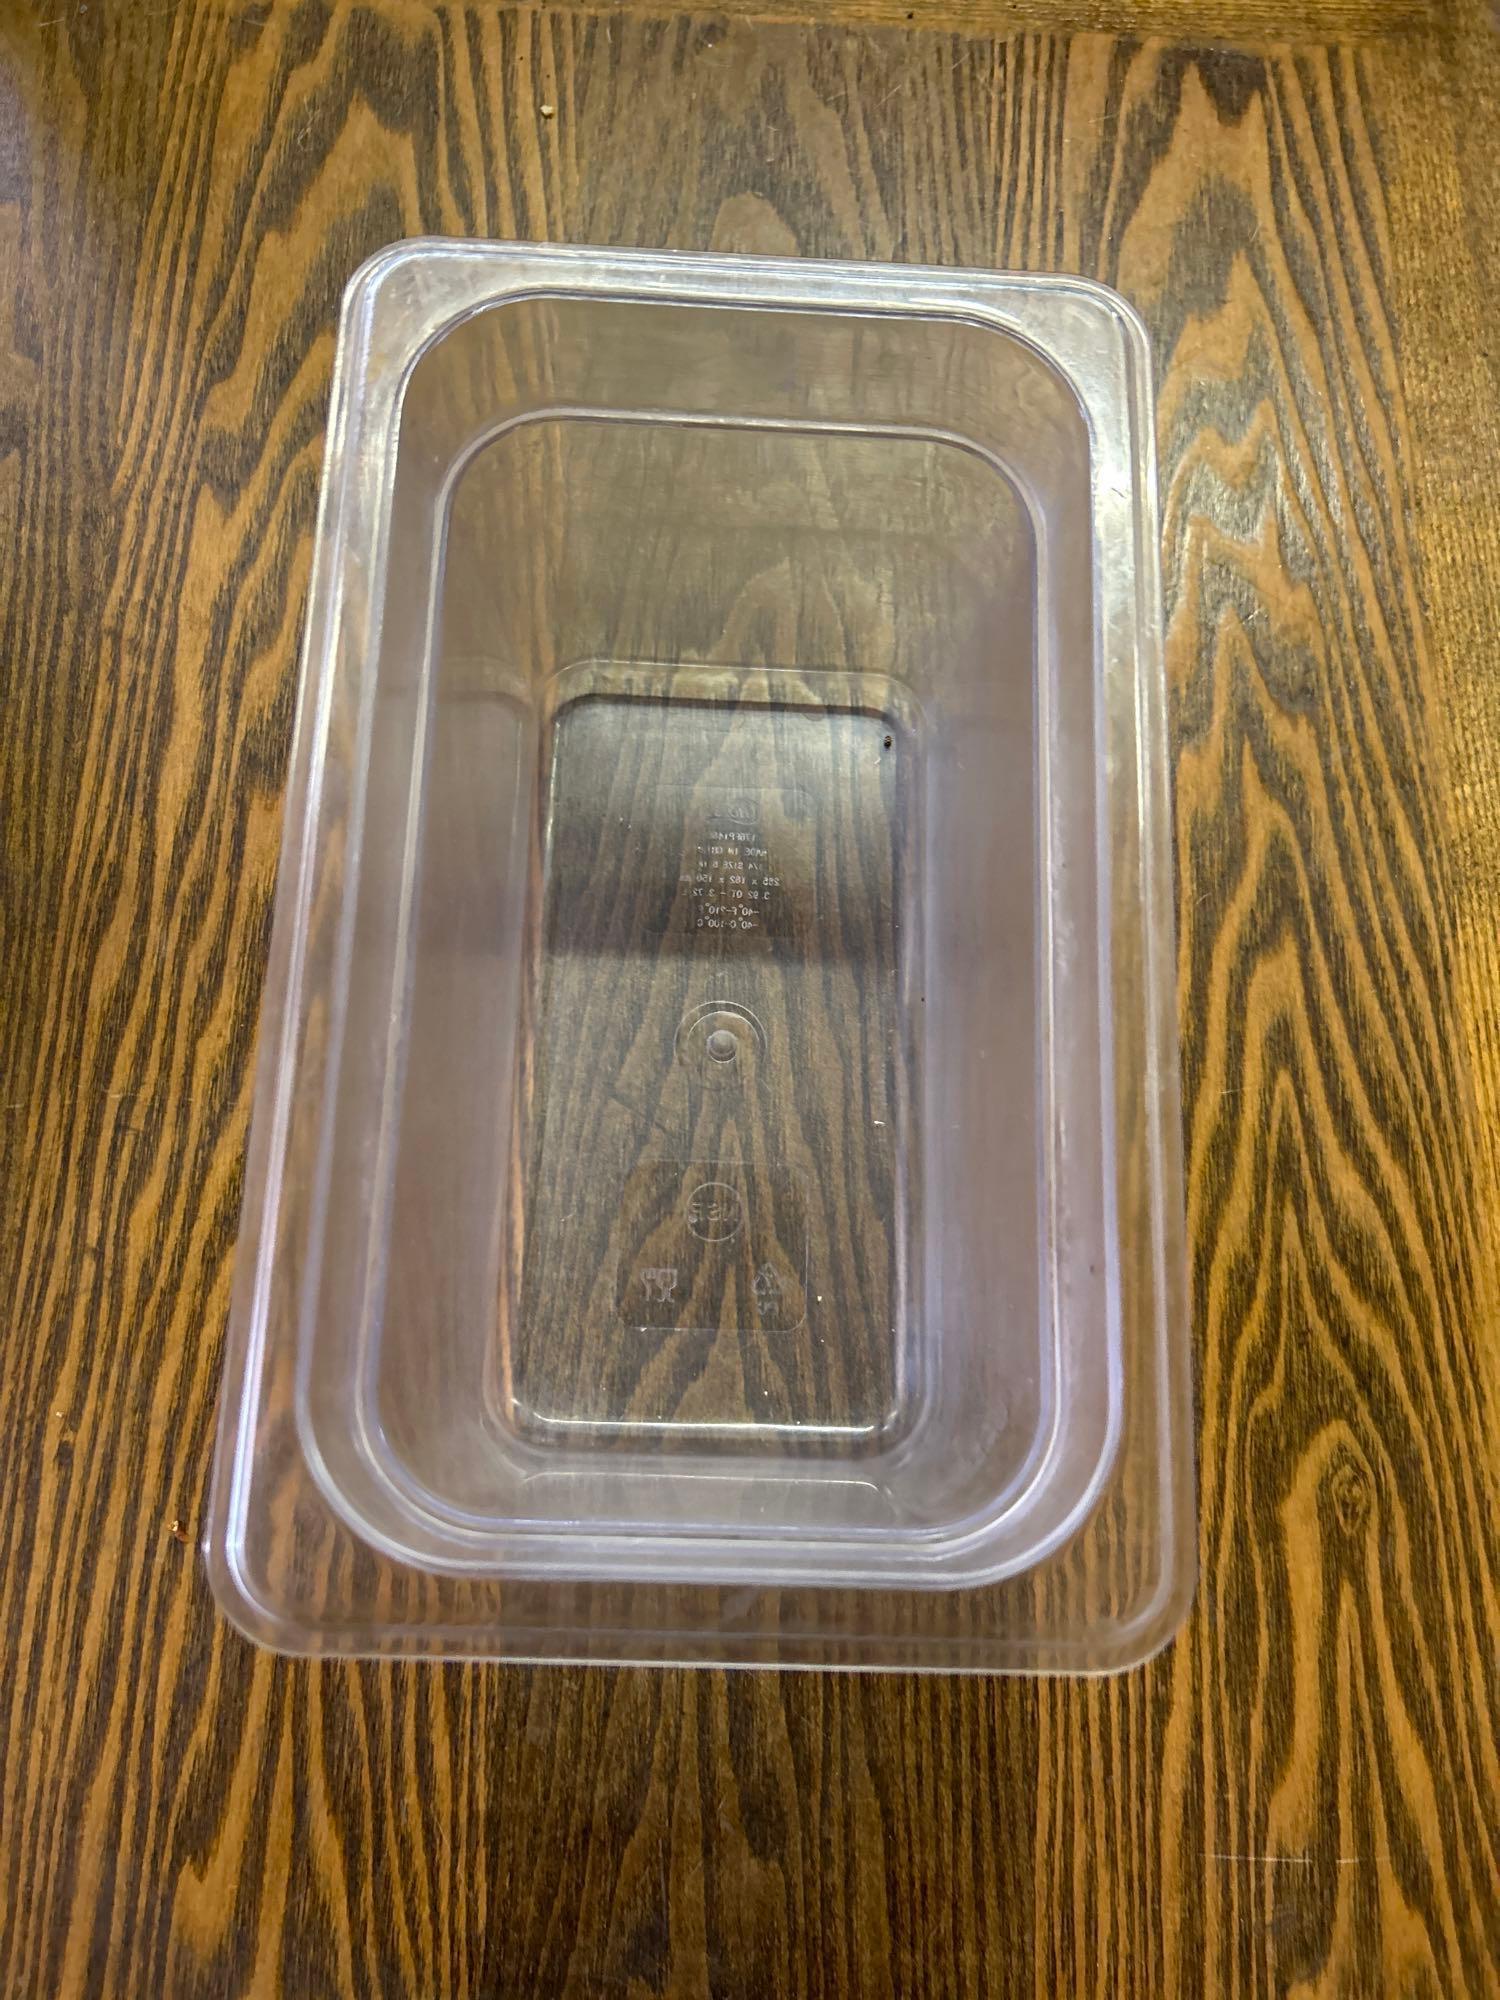 Fourth Size x 6 in. Plastic Pans